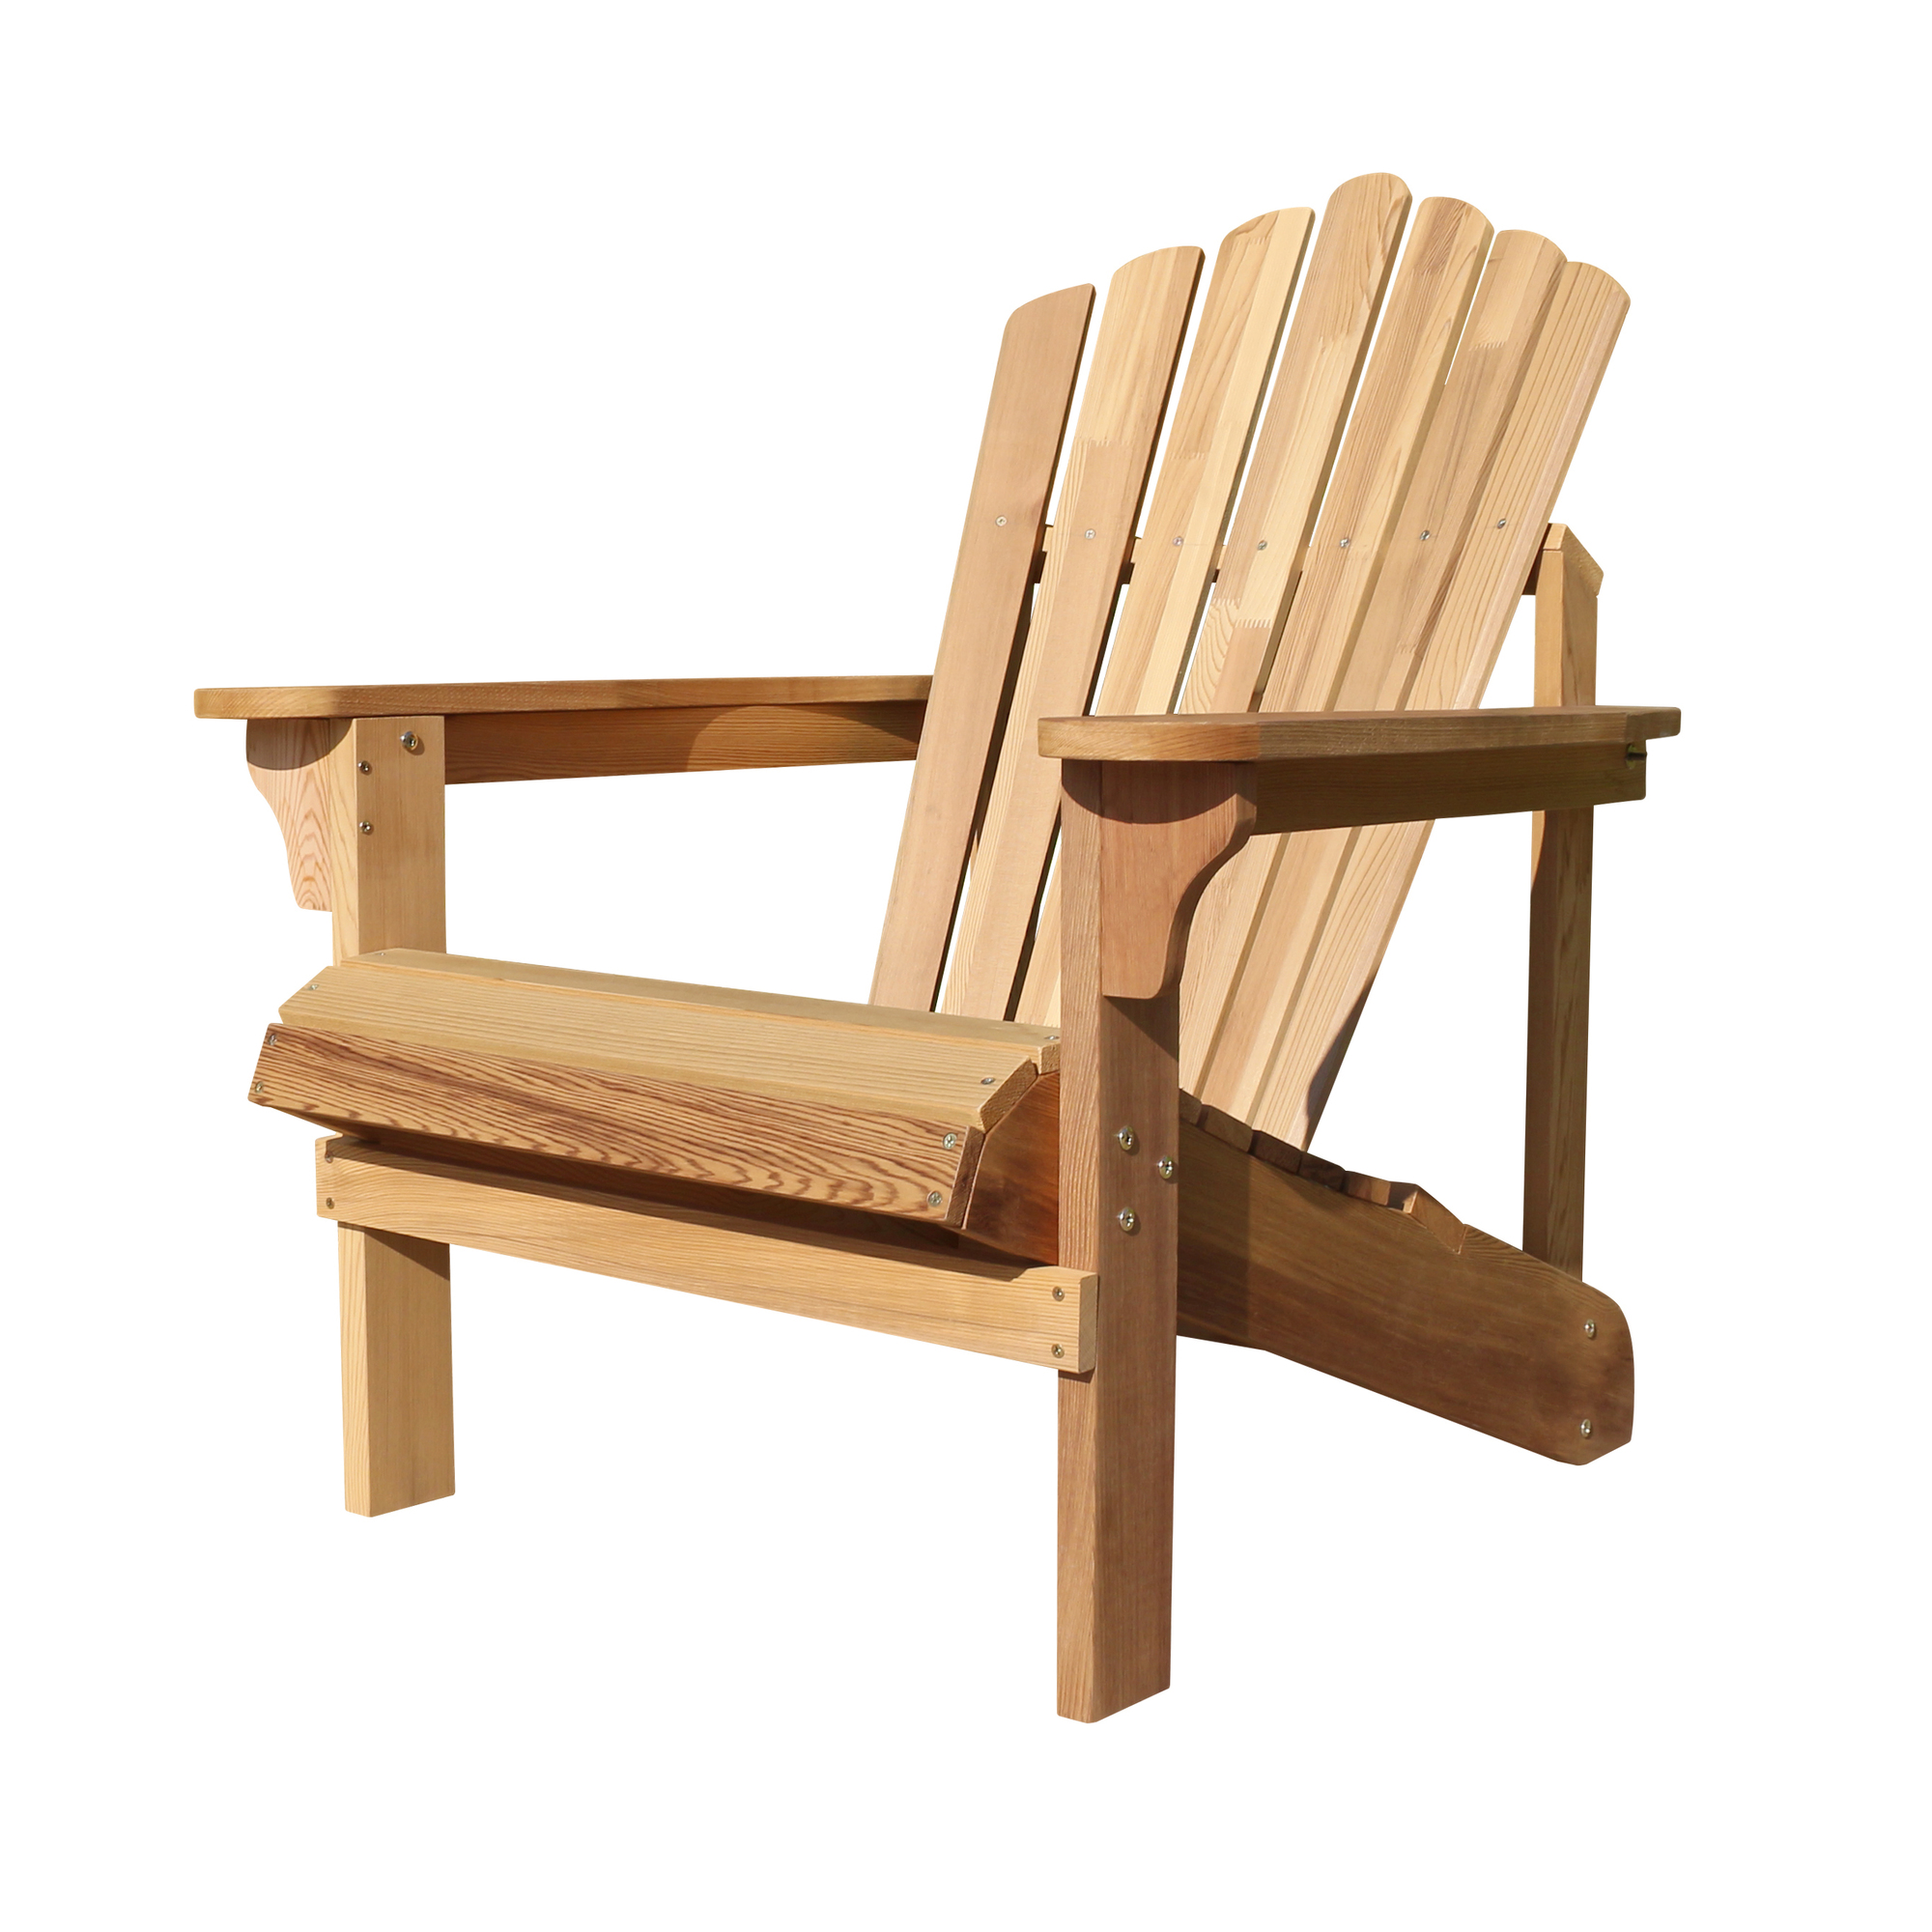 Merry Products, Riverside Adirondack Chair, Western Red Cedar, Primary Color Other, Included (qty.) 1, Model ADC0583300010